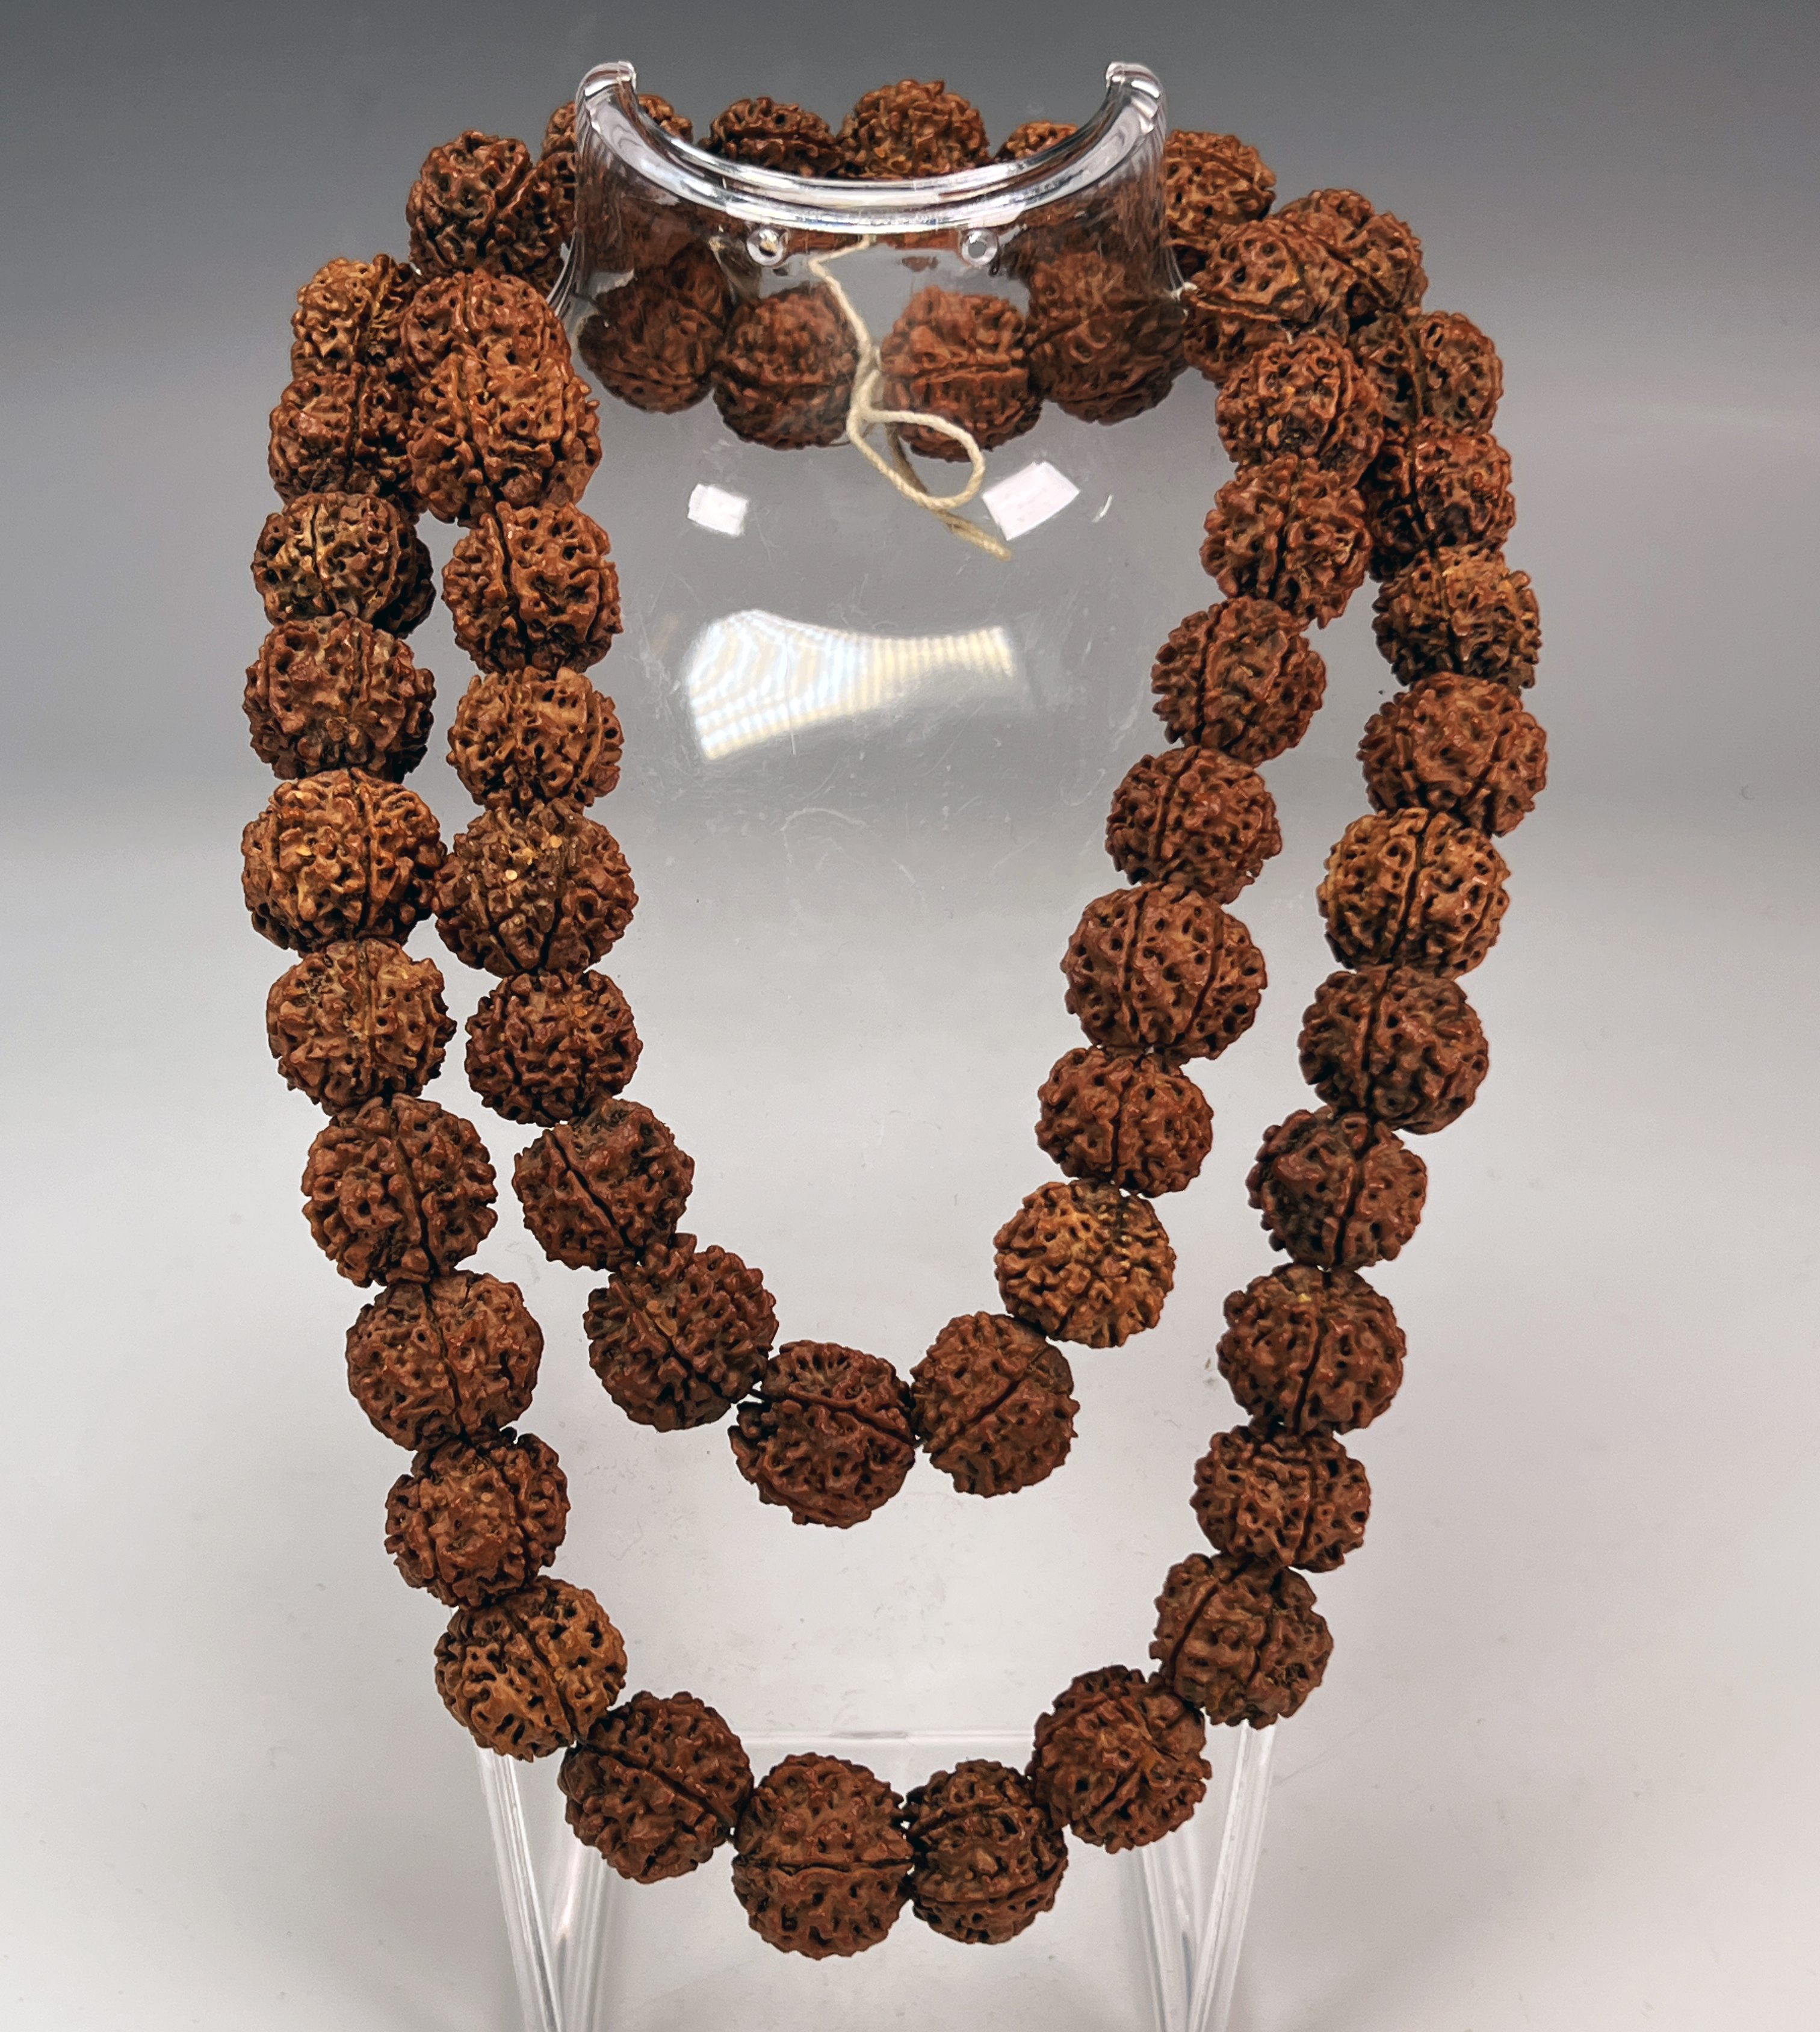 Traditional Chinese Puti Bead Necklace - A Cultural Gem image 1